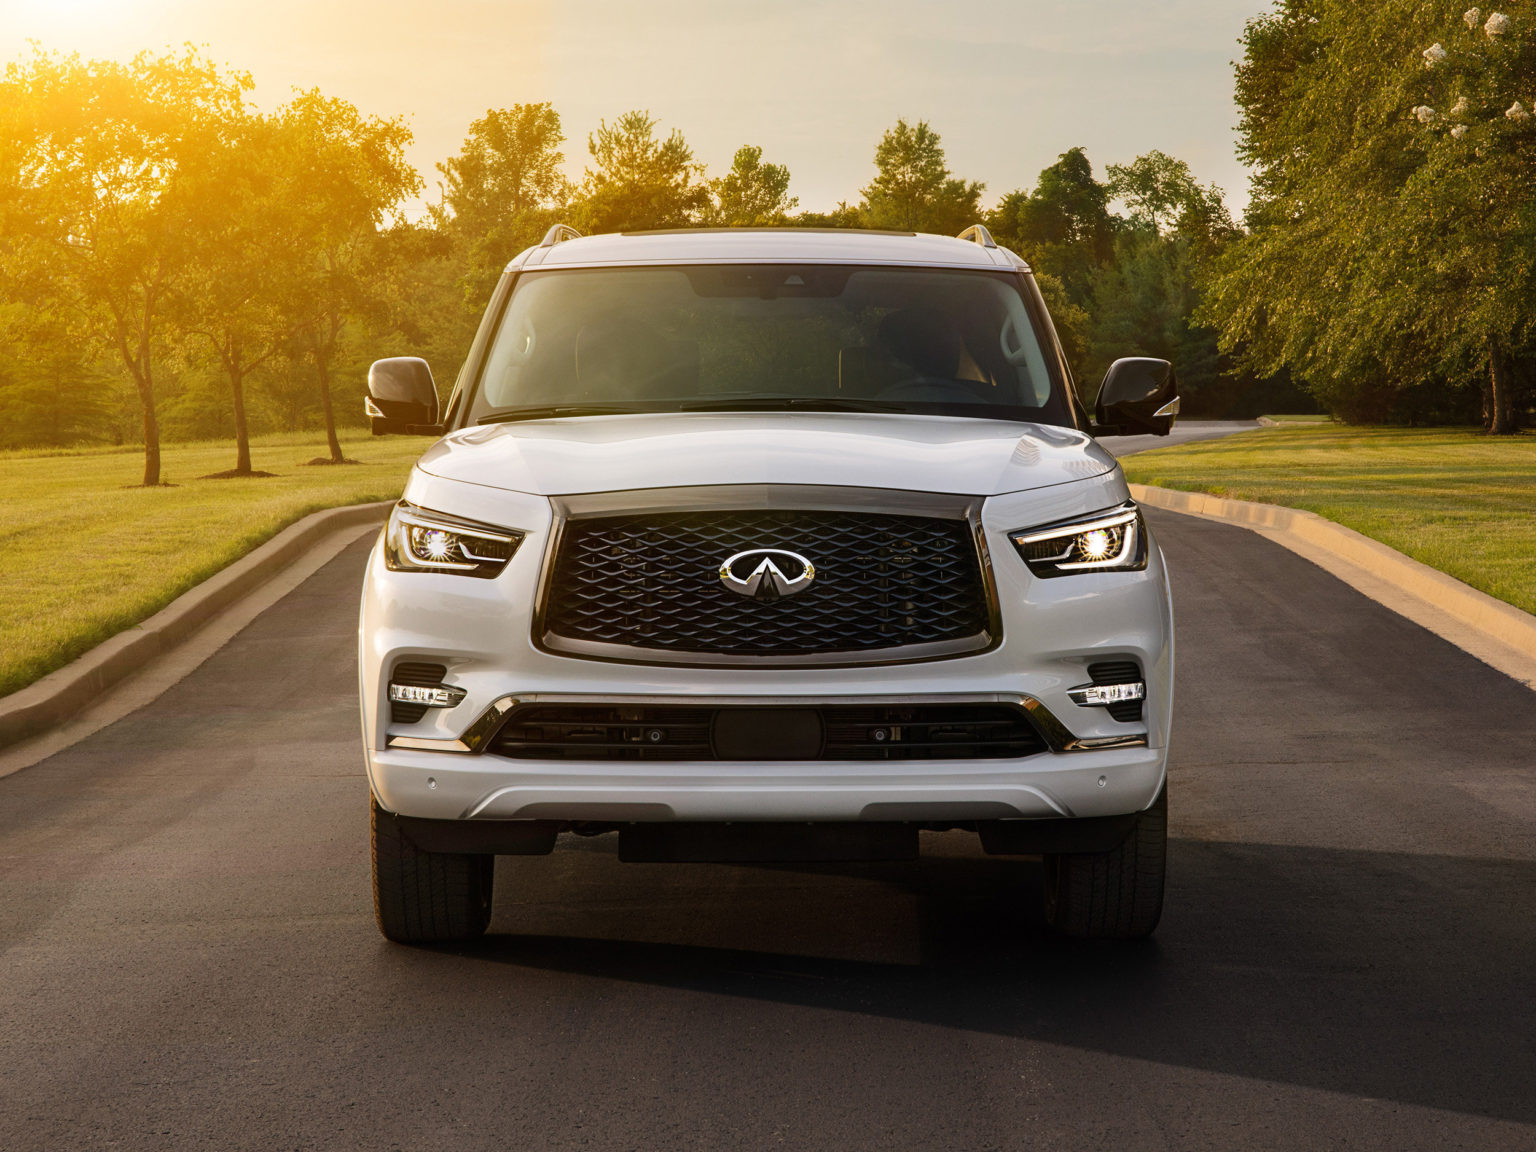 The 2021 QX80 has been enhanced for the new model year.